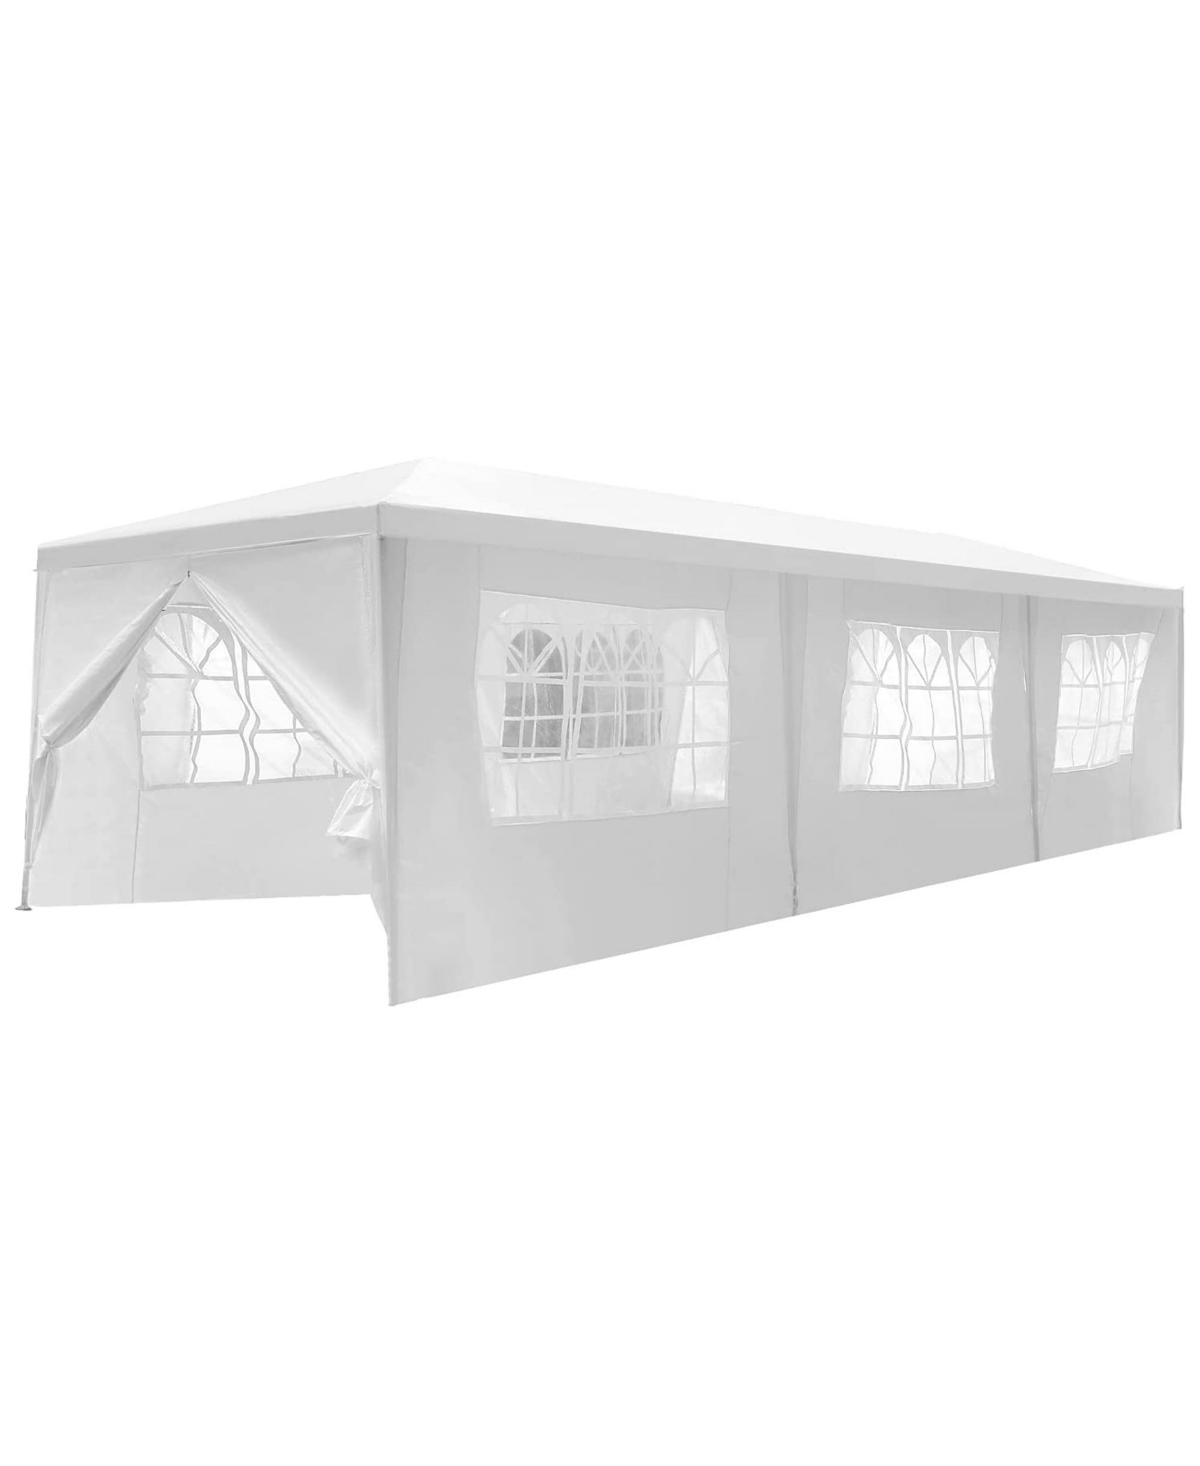 30 Ft. W x 10 Ft. D Wedding Party Tent Canopy with 8 Side Walls - White